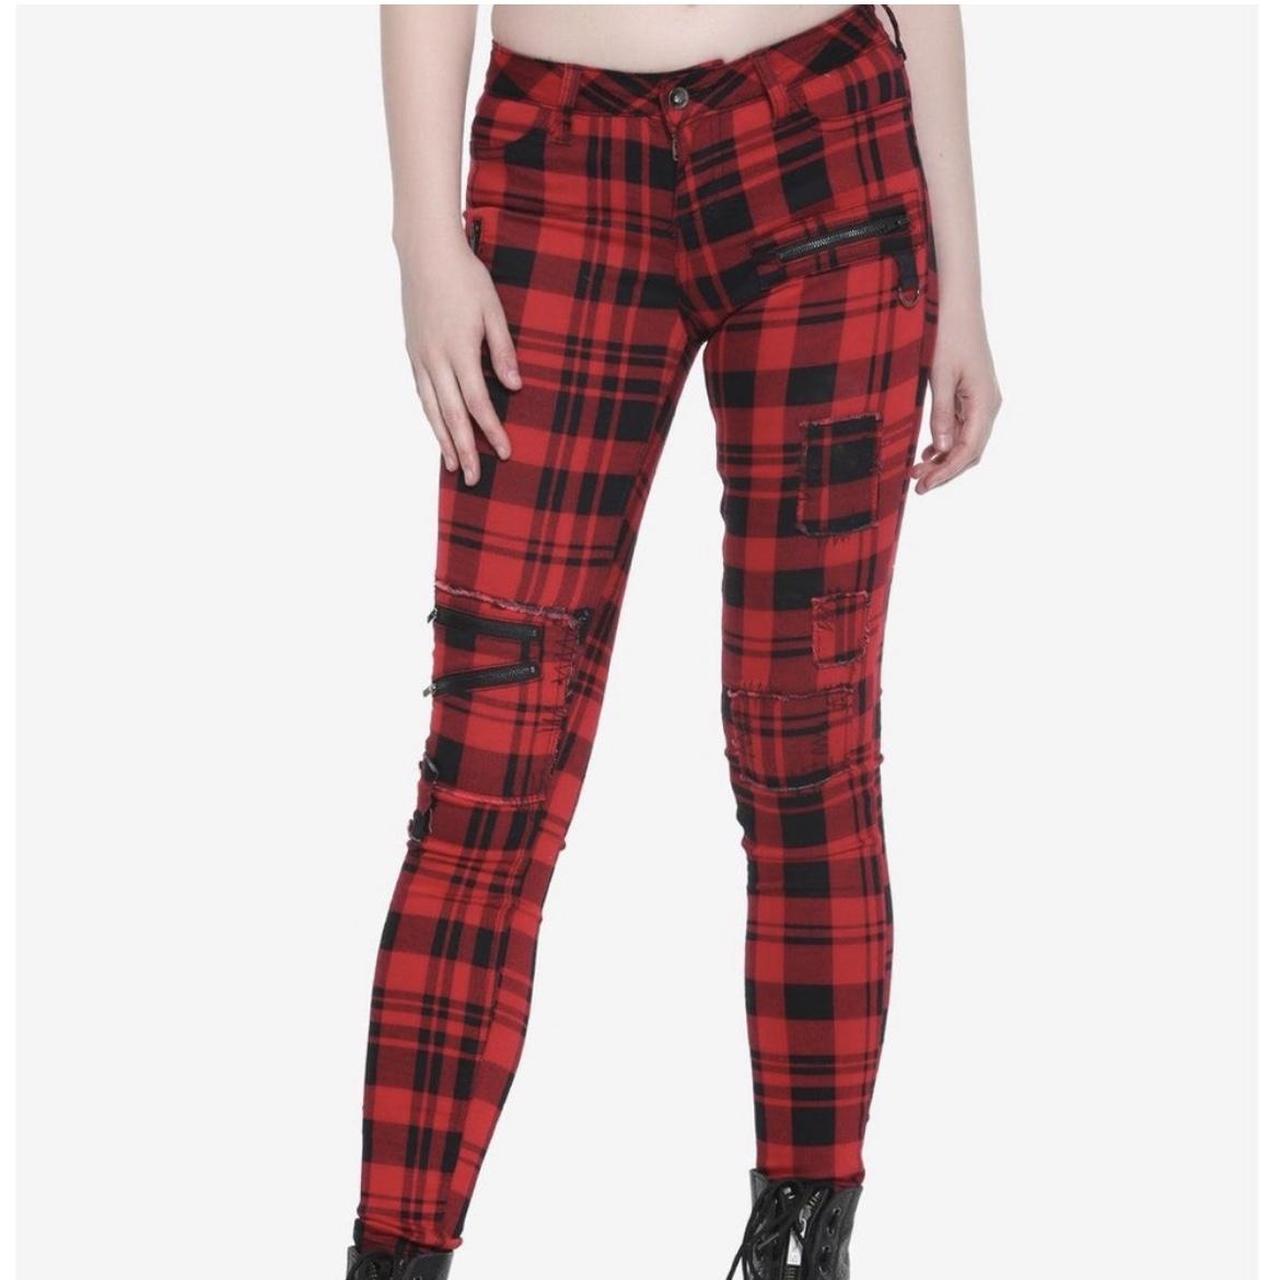 ⚠️ NOT AVAILABLE DO NOT BUY ⚠️plaid pants with... - Depop